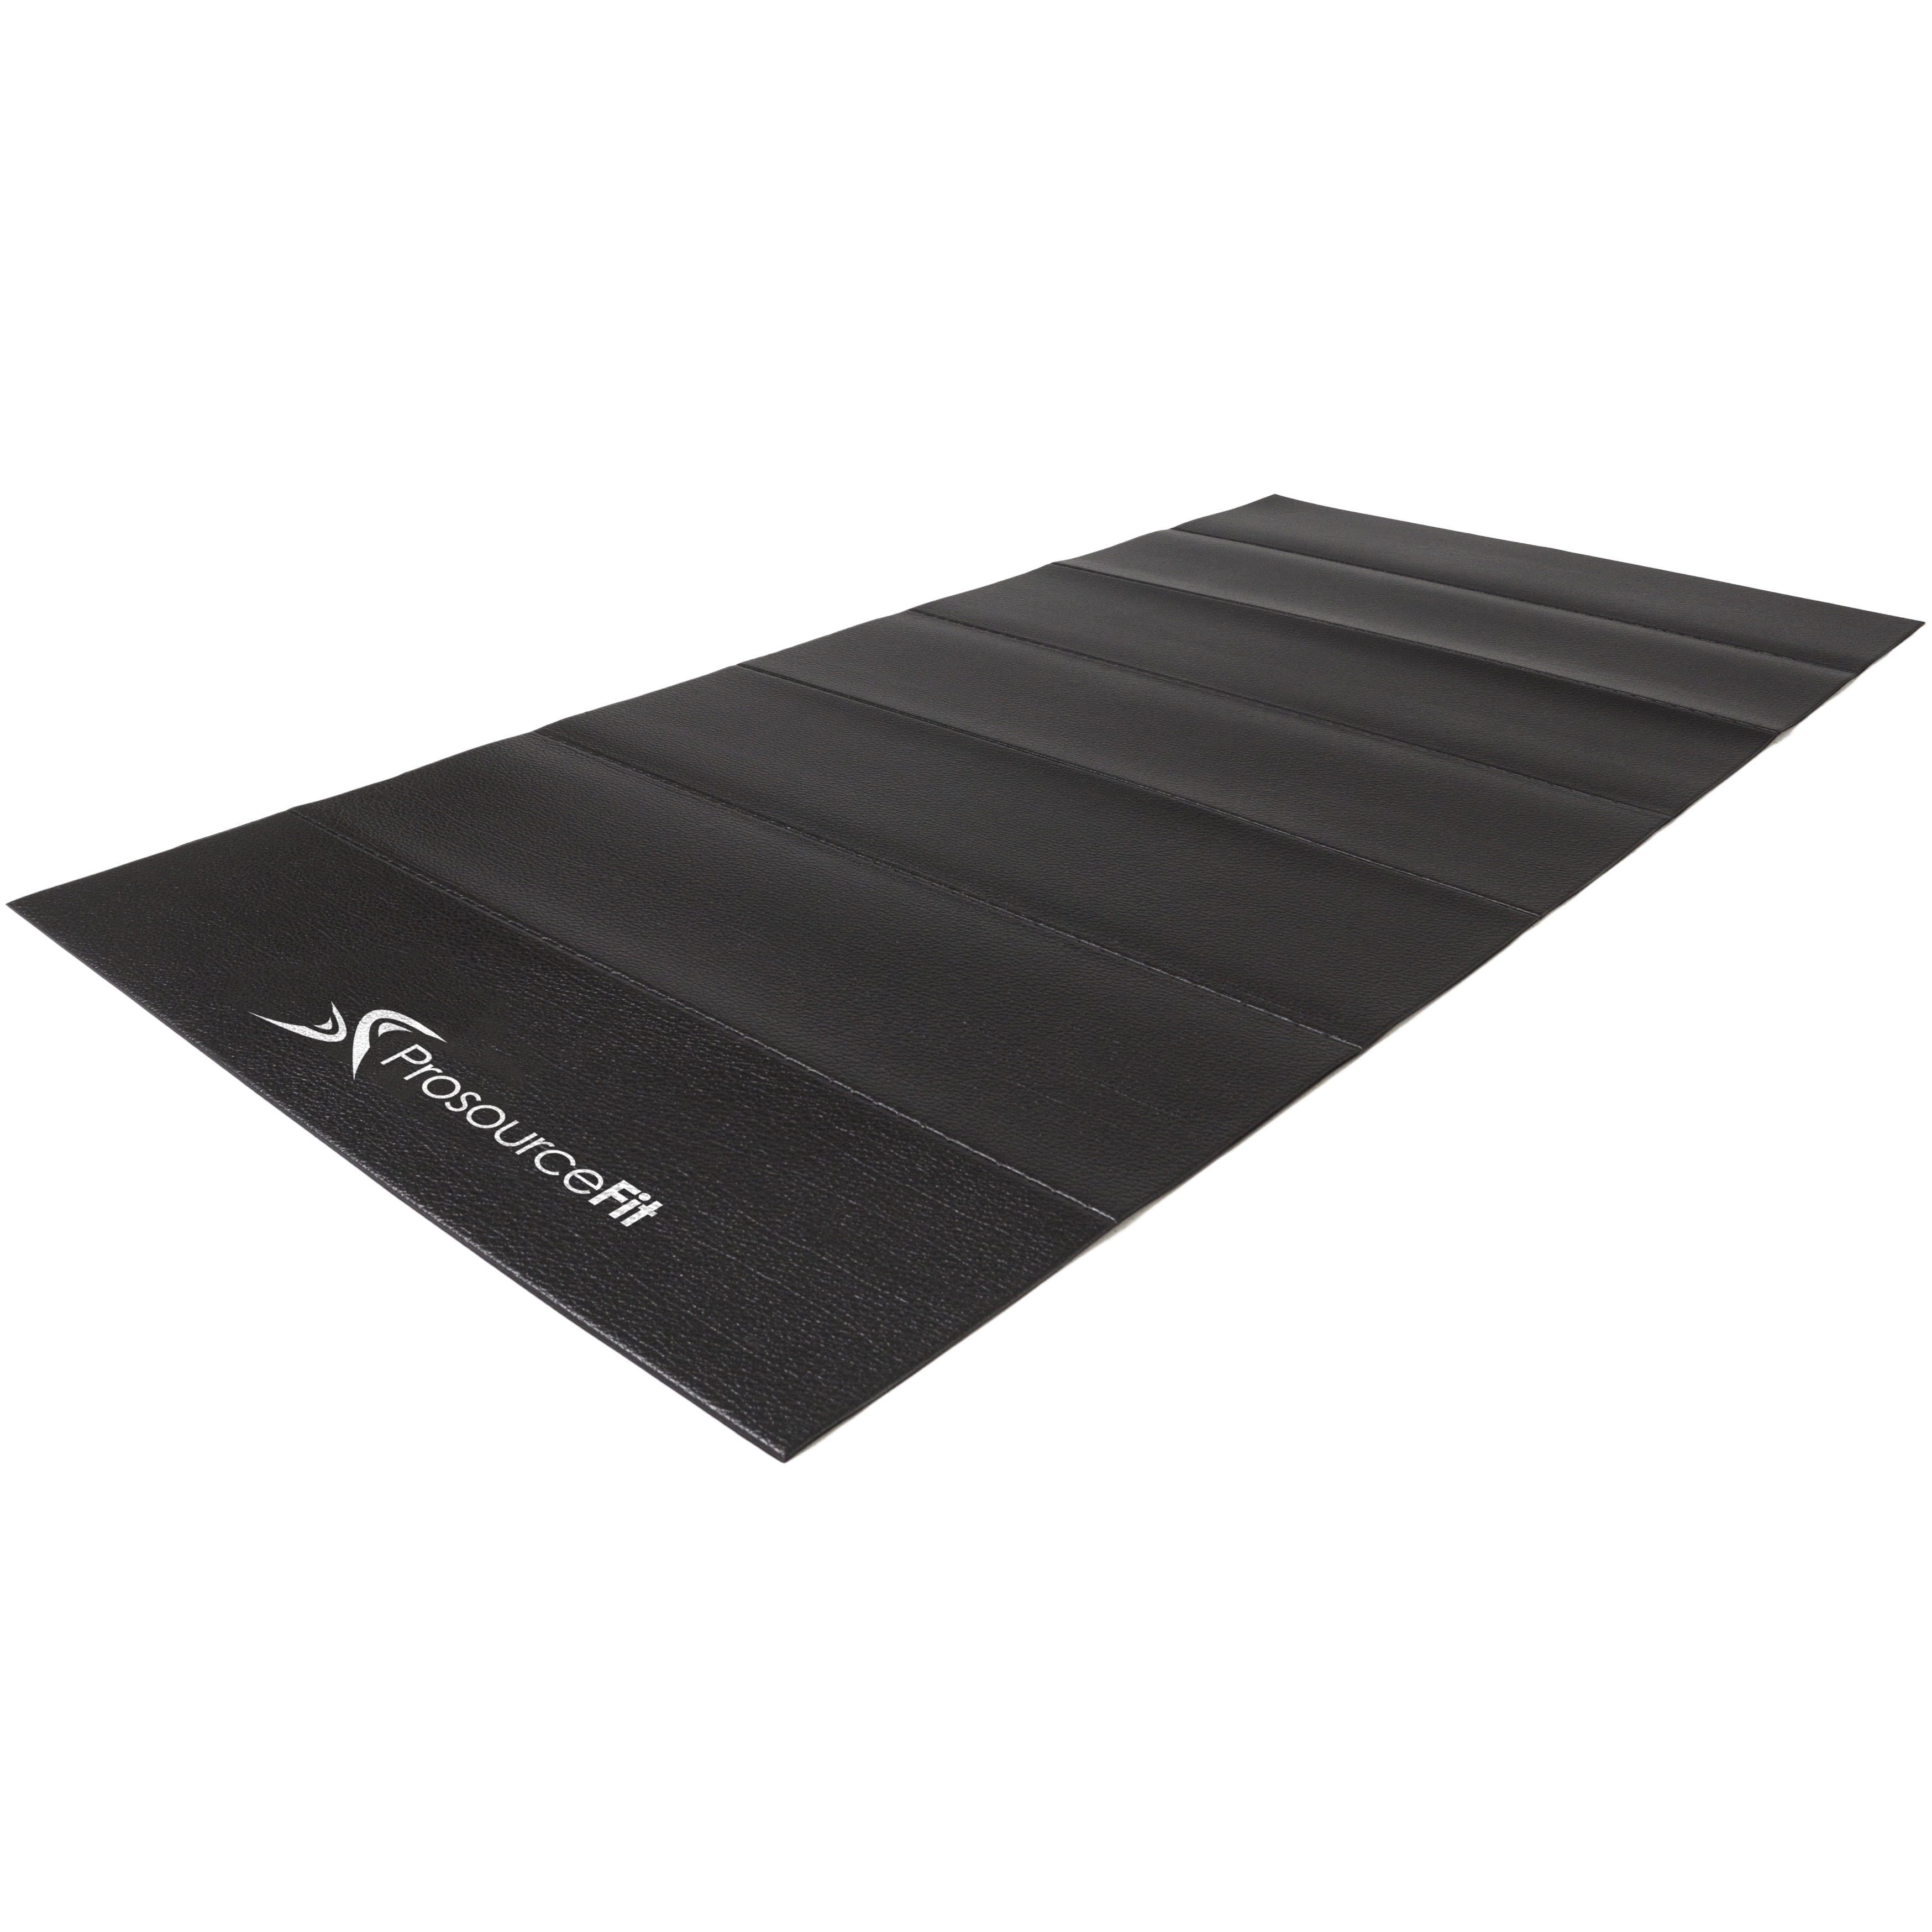 Details about   ProSource Fit Treadmill & Exercise Equipment Mats Regular 6.5’L x 3’W x 5/32”...